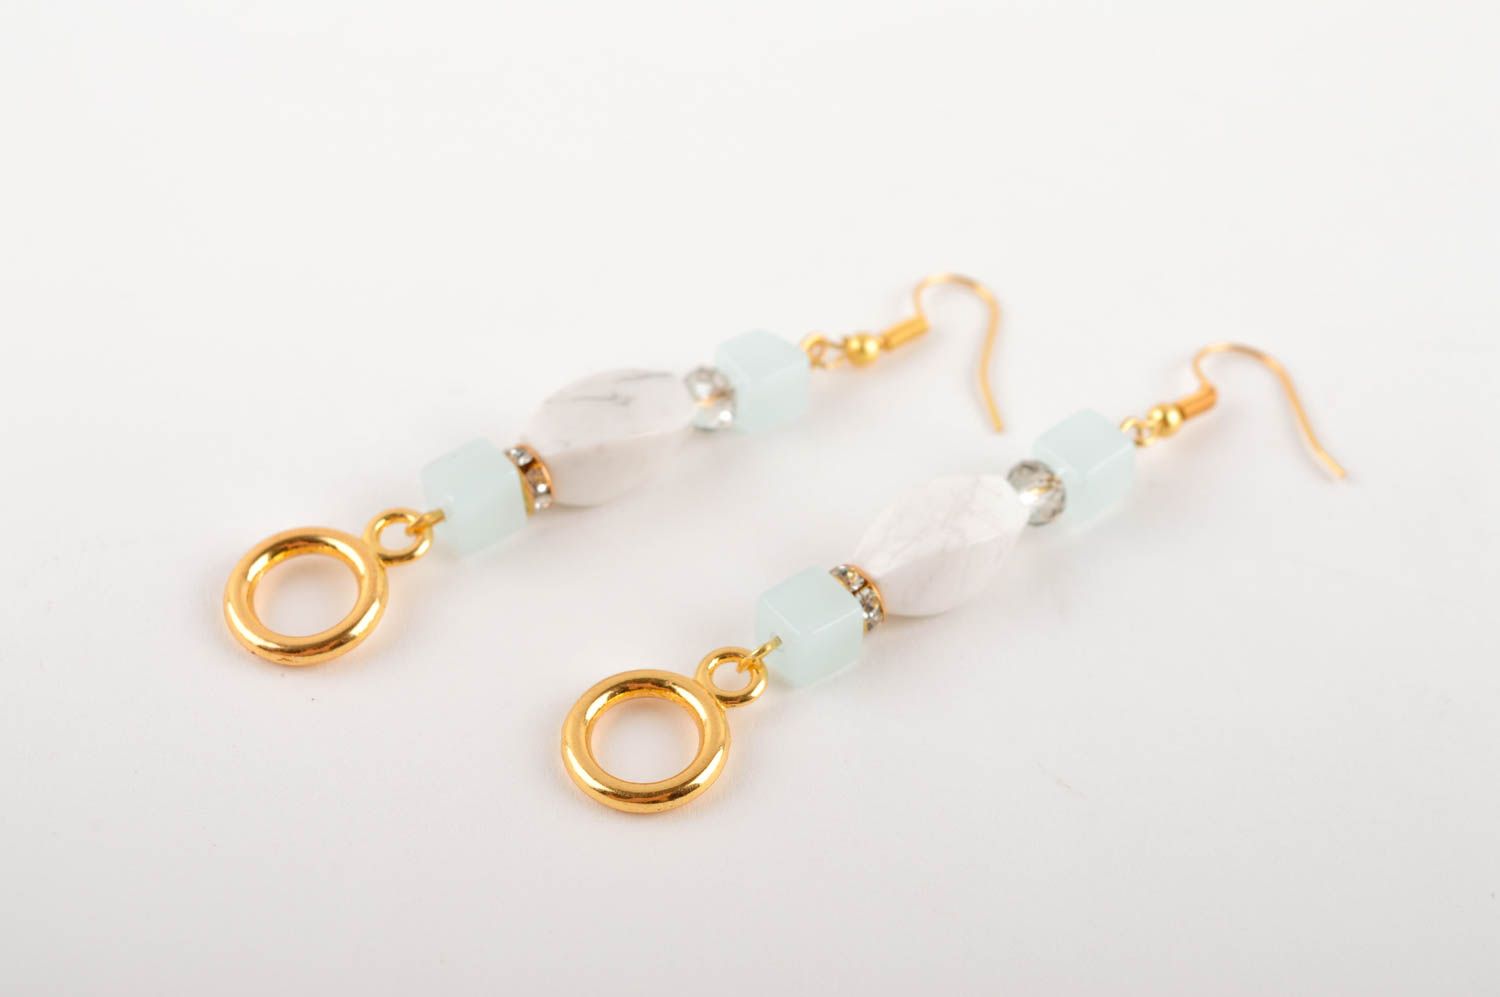 Handmade earrings with natural stones stylish accessories fashion jewelry photo 4